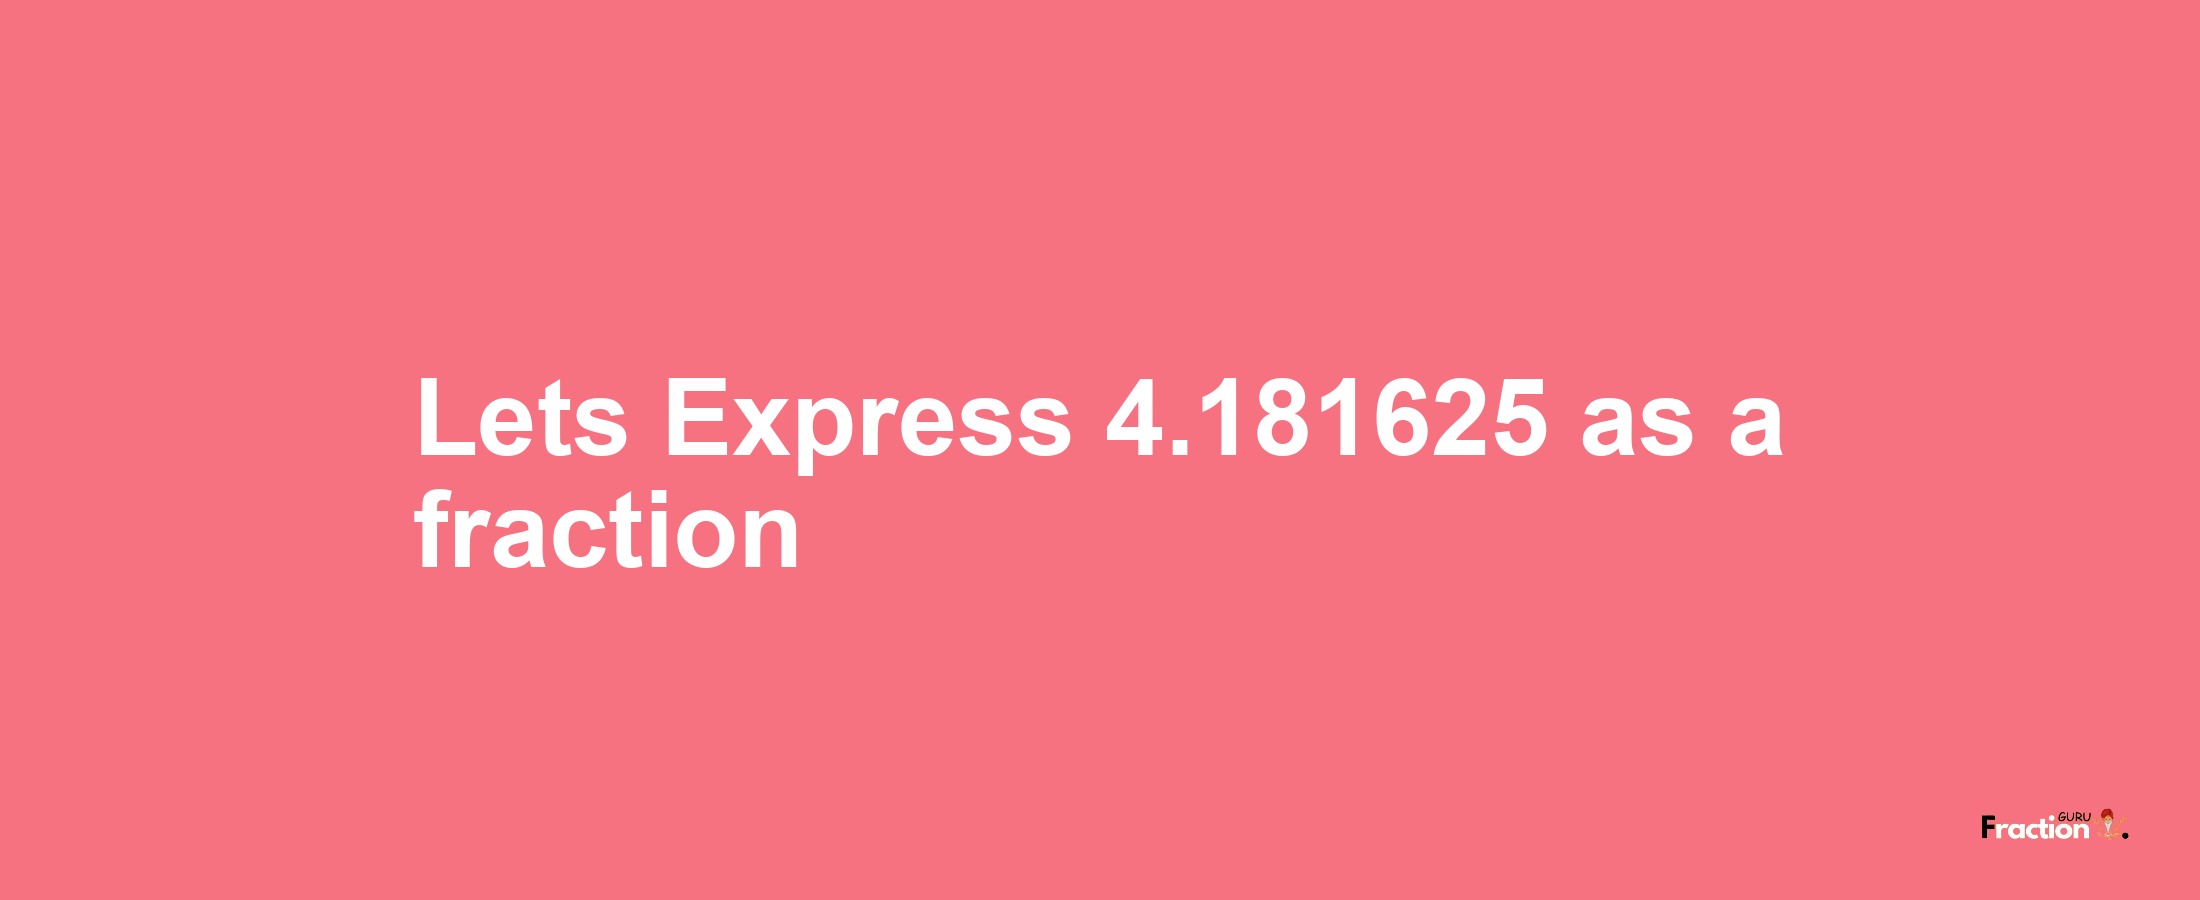 Lets Express 4.181625 as afraction